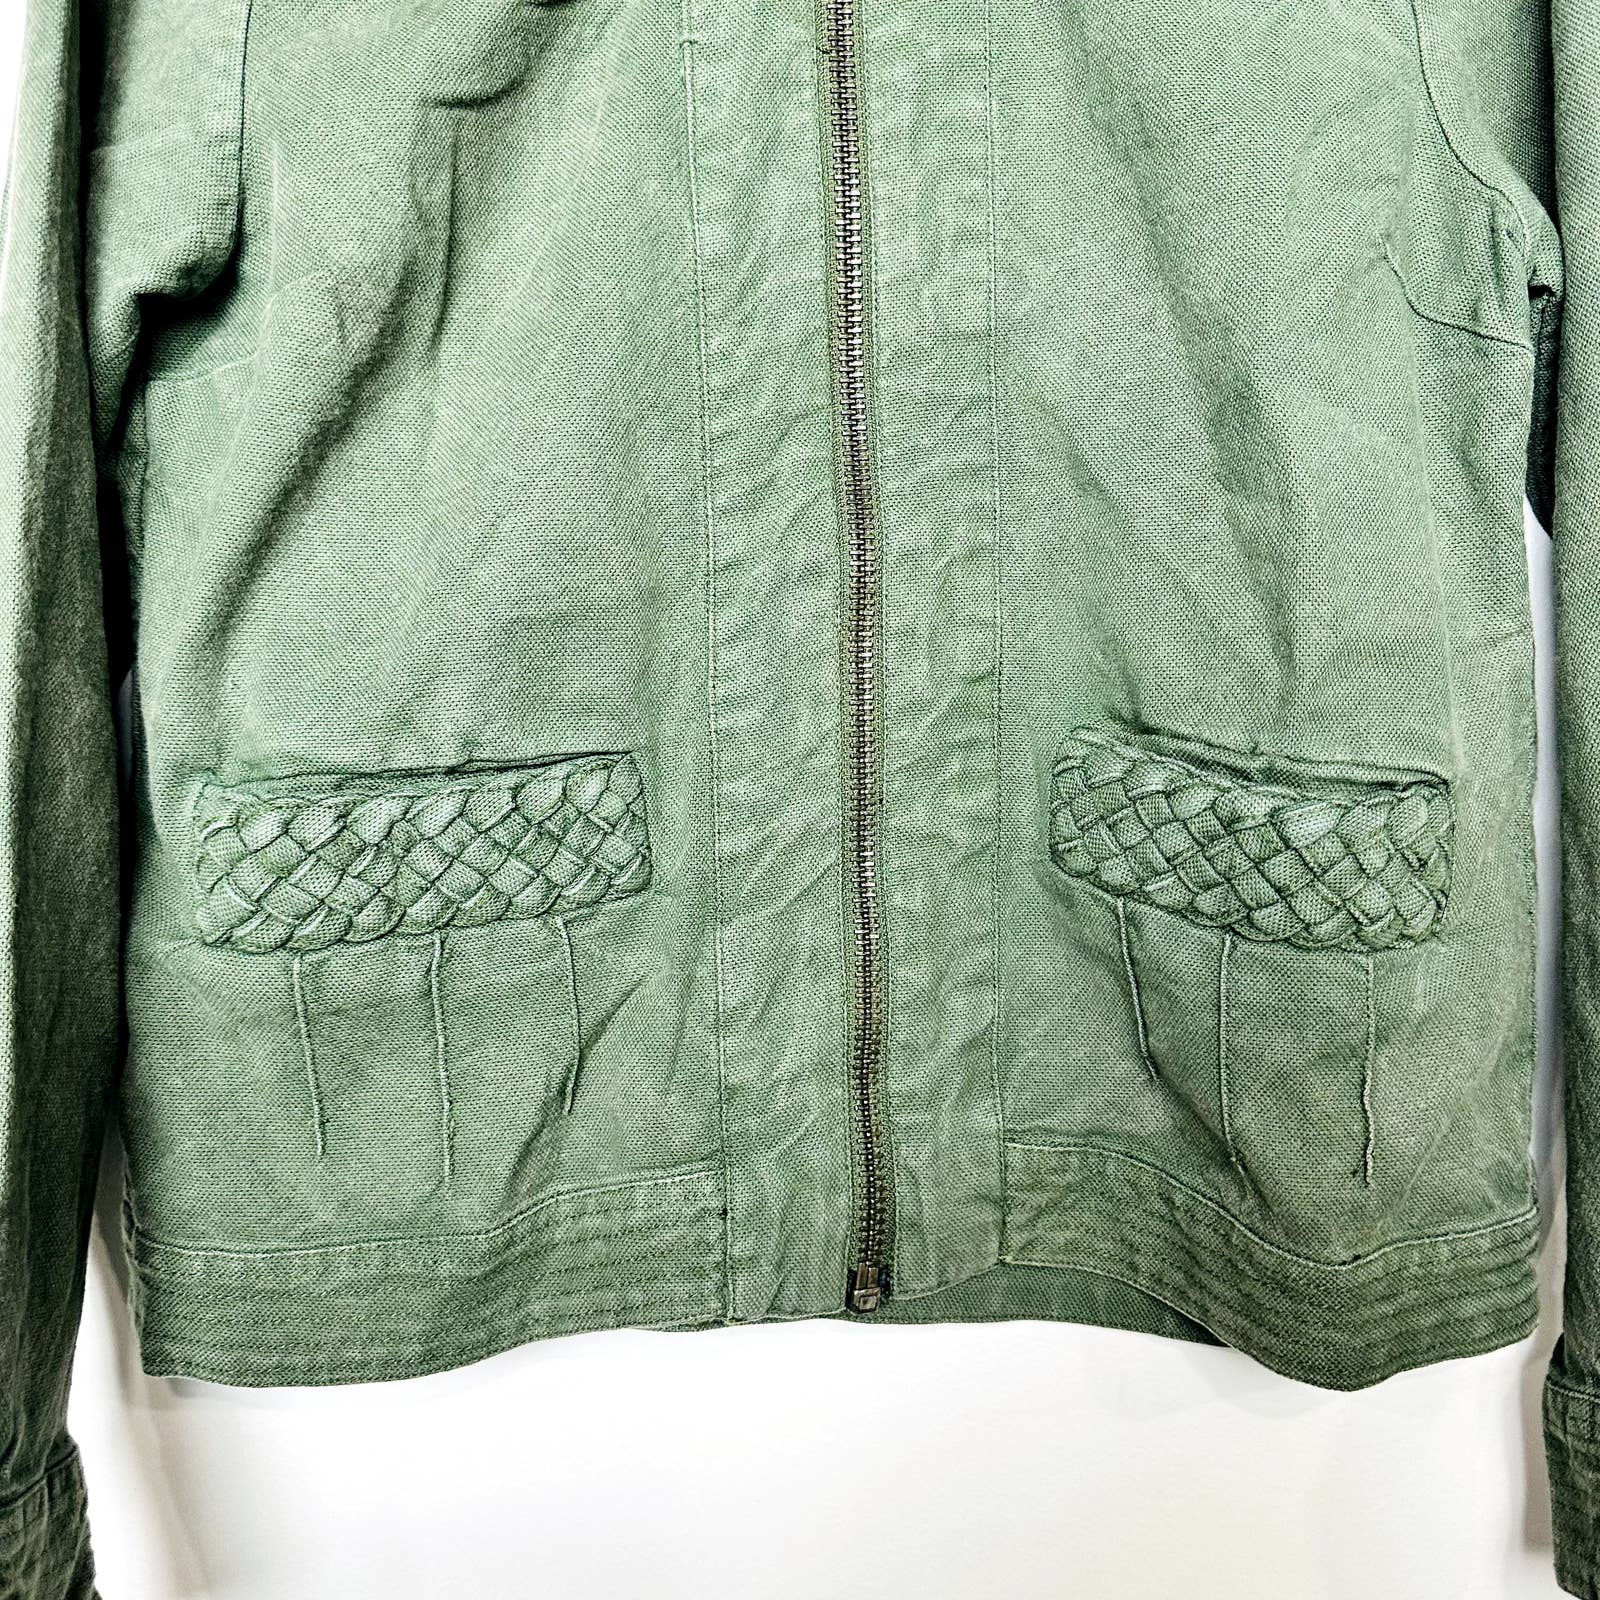 Chaser NWT Vintage Full Zip Braided Collarless Canvas Jacket Army Green Sz Small